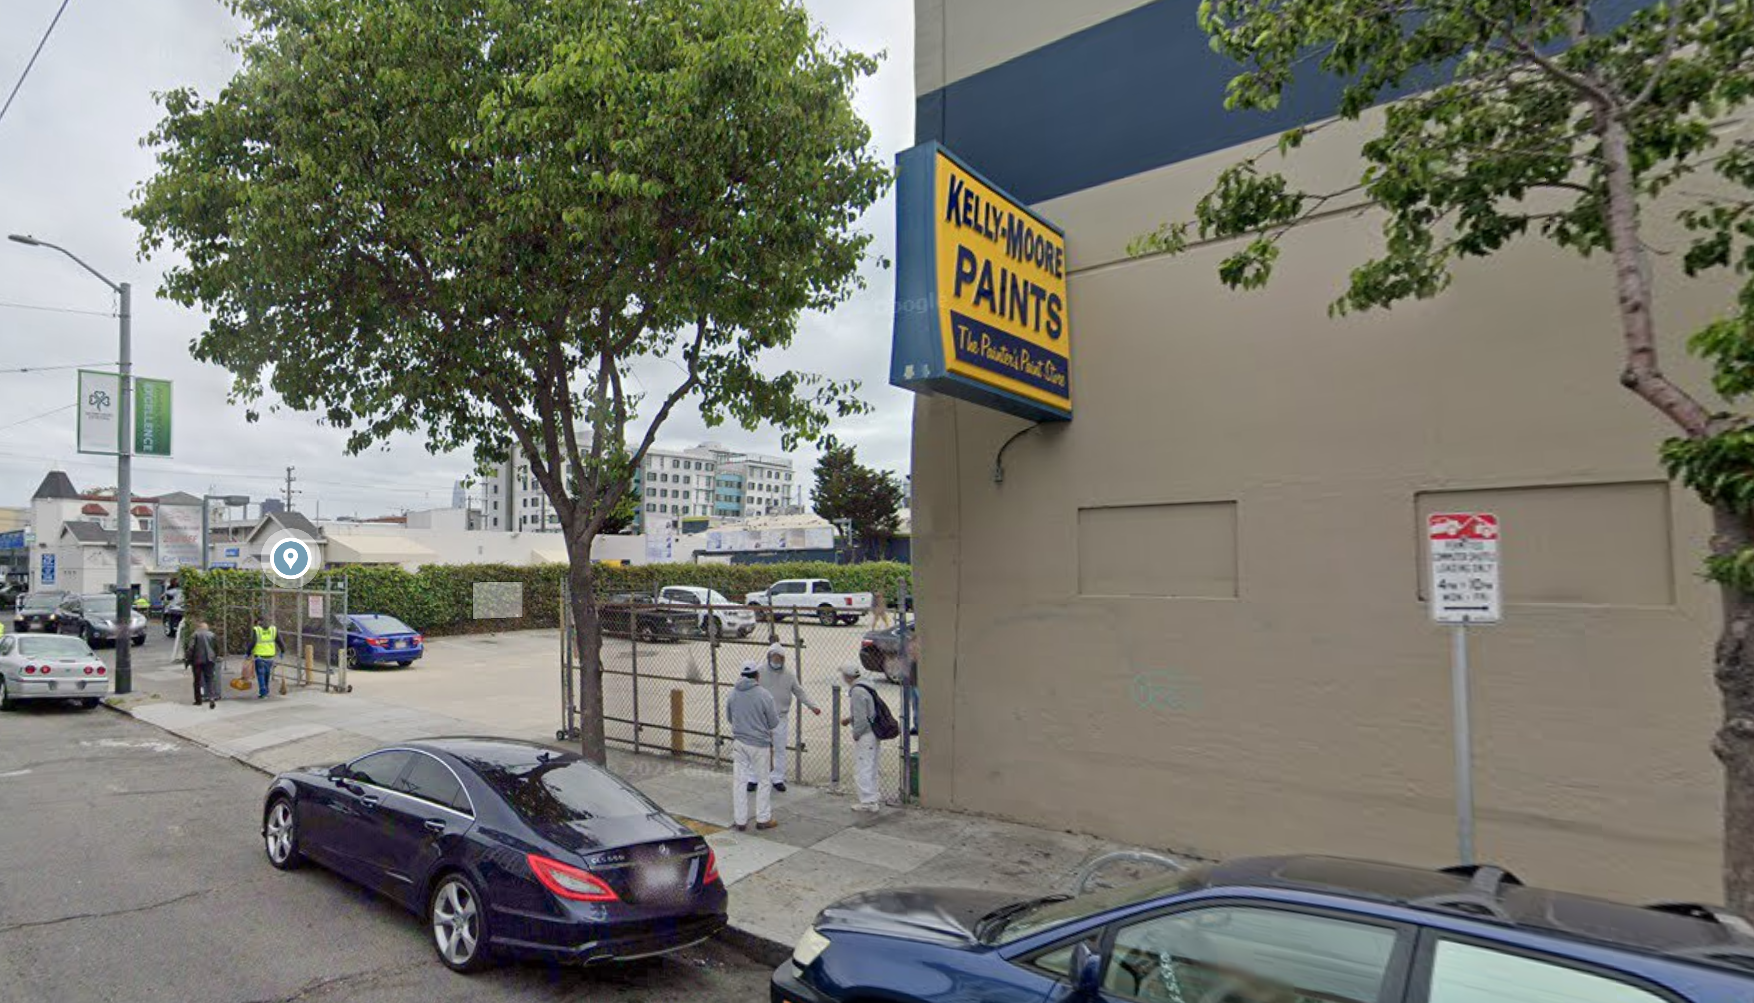 A Google street view of the Kelly-Moore Paints store at 565 South Van Ness. The paint company announced Friday it is ceasing all operations immediately.